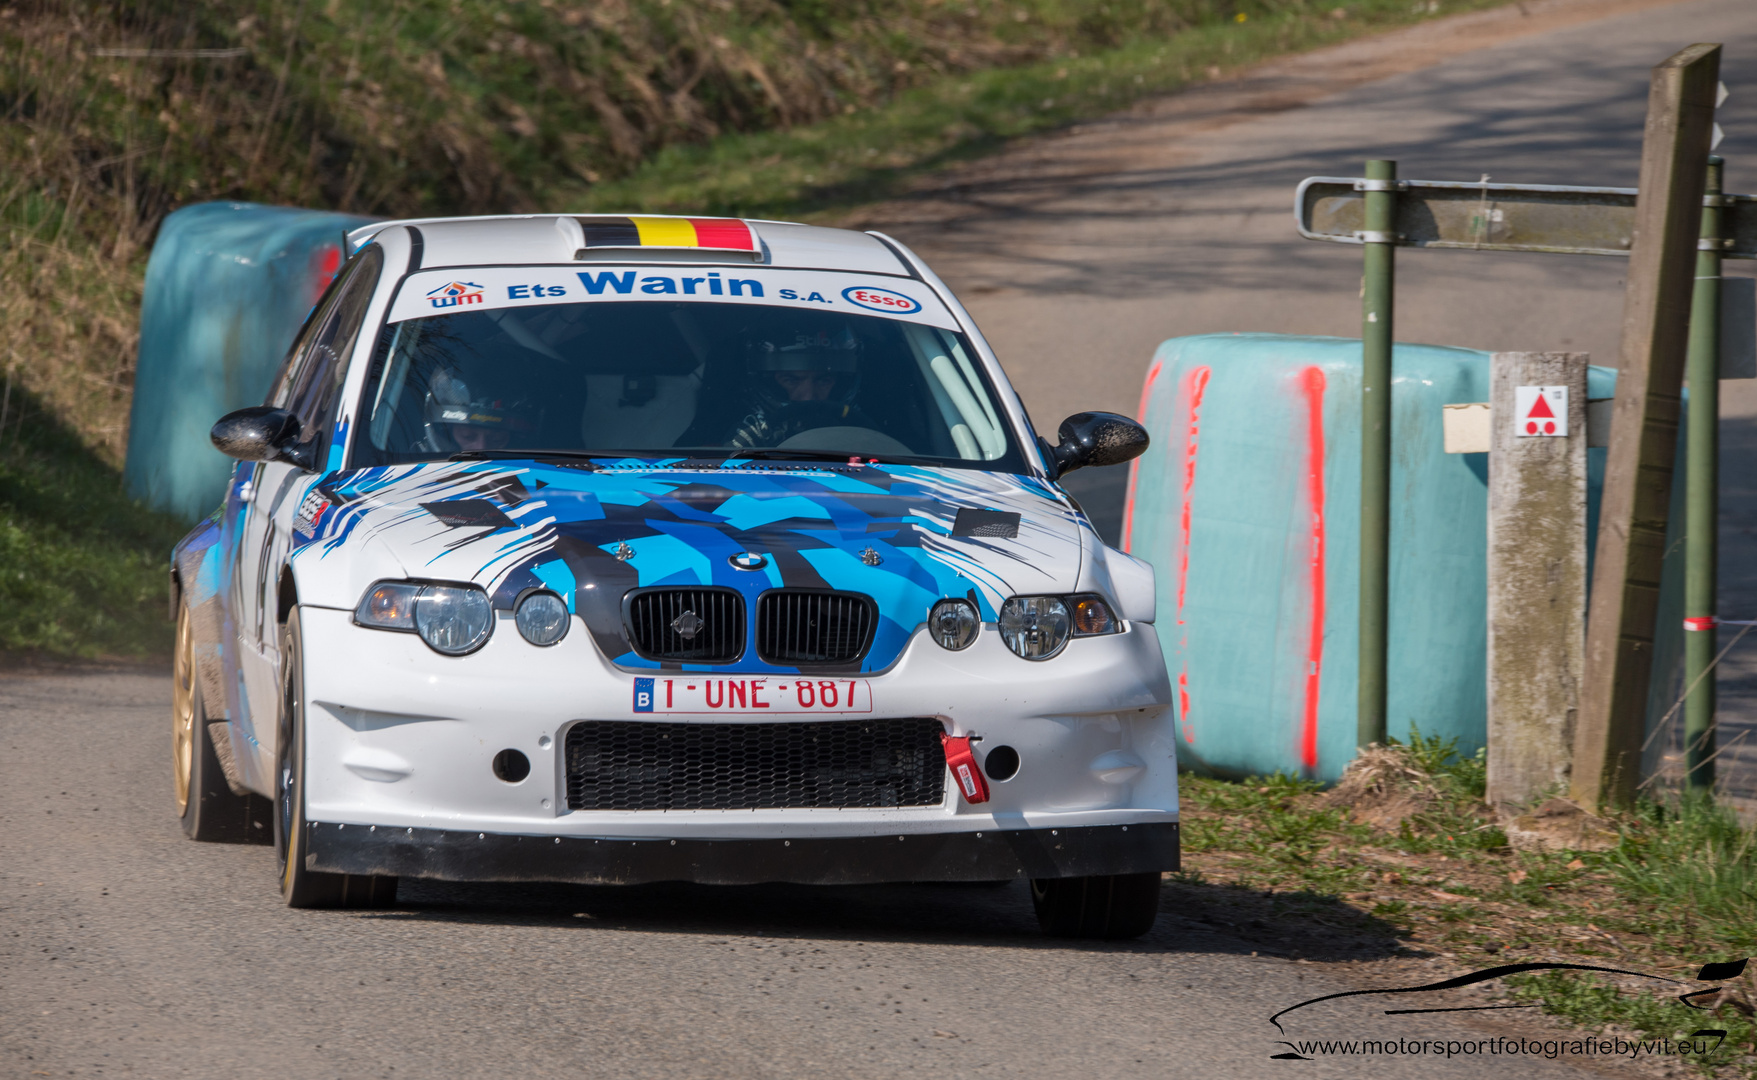 In Action......Rallye Trois Ponts 2019